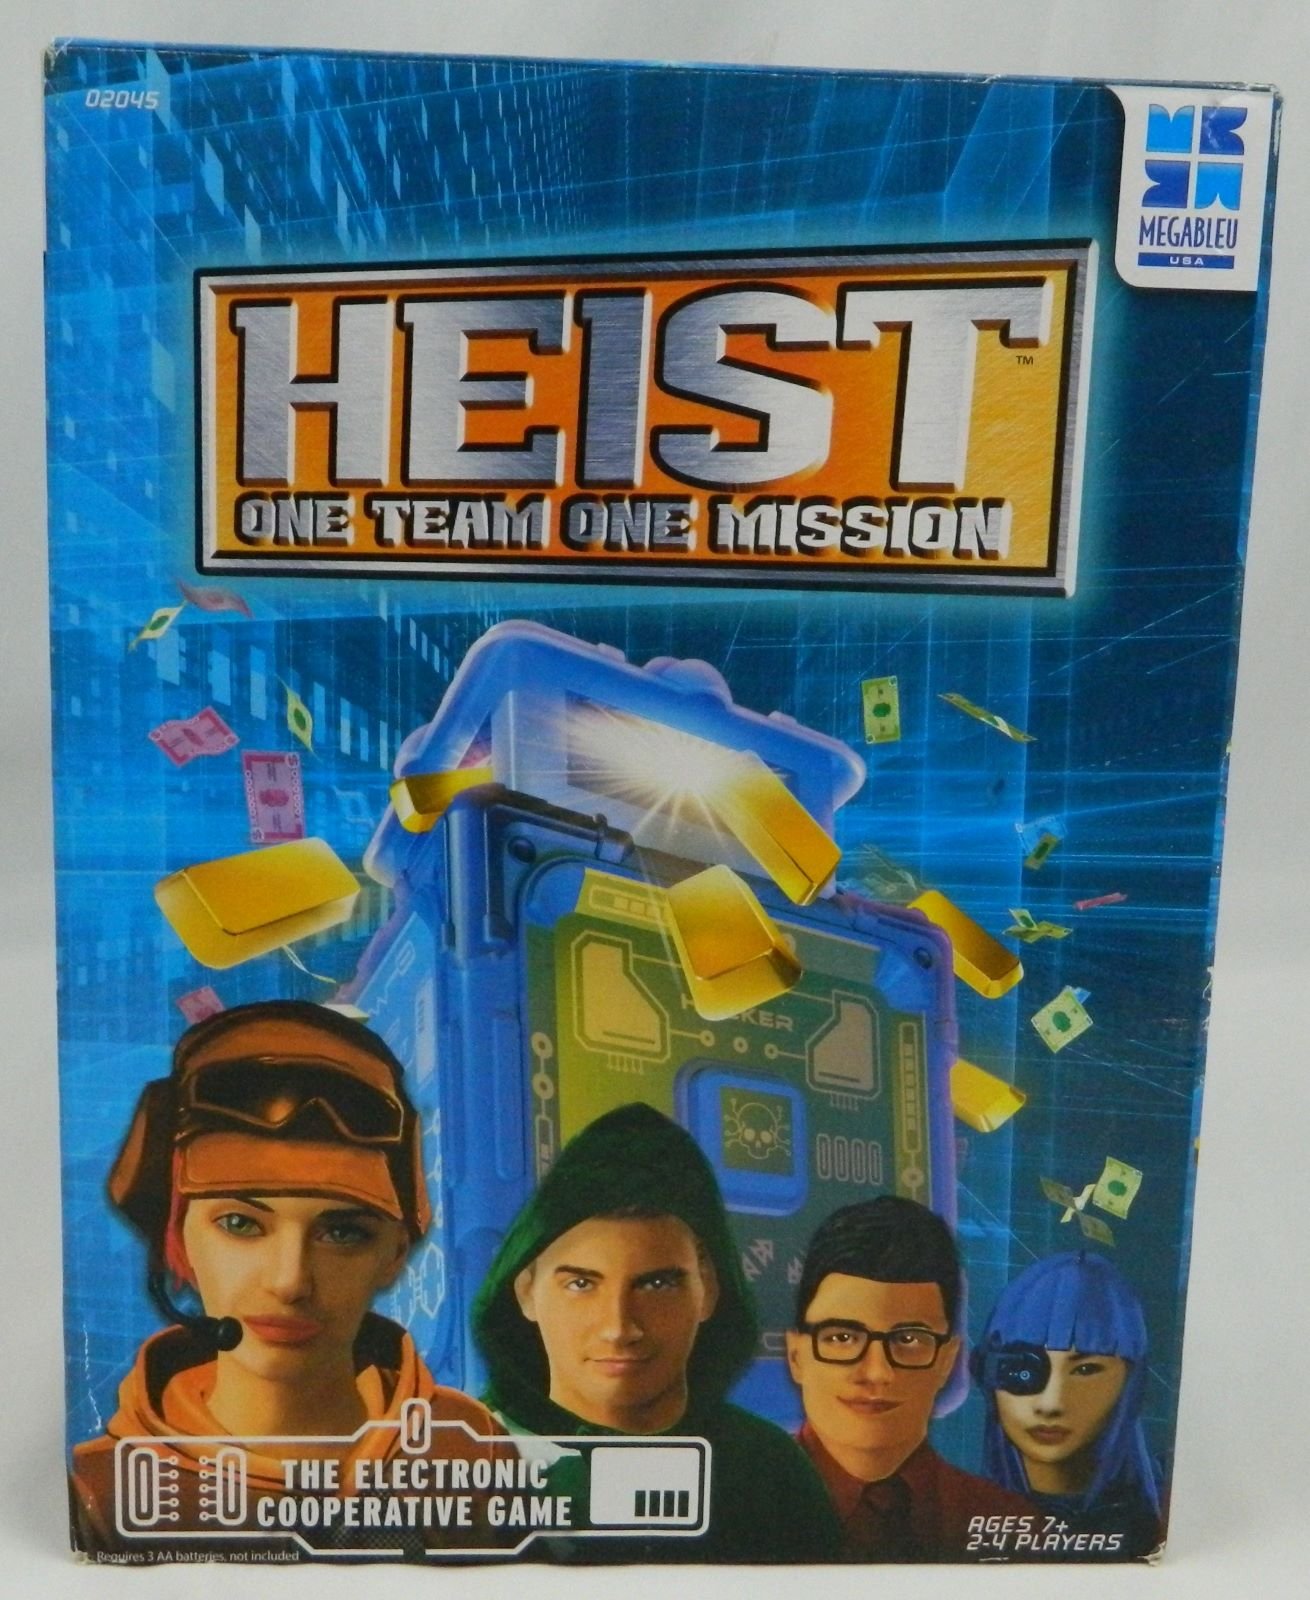 Box for Heist One Team One Mission